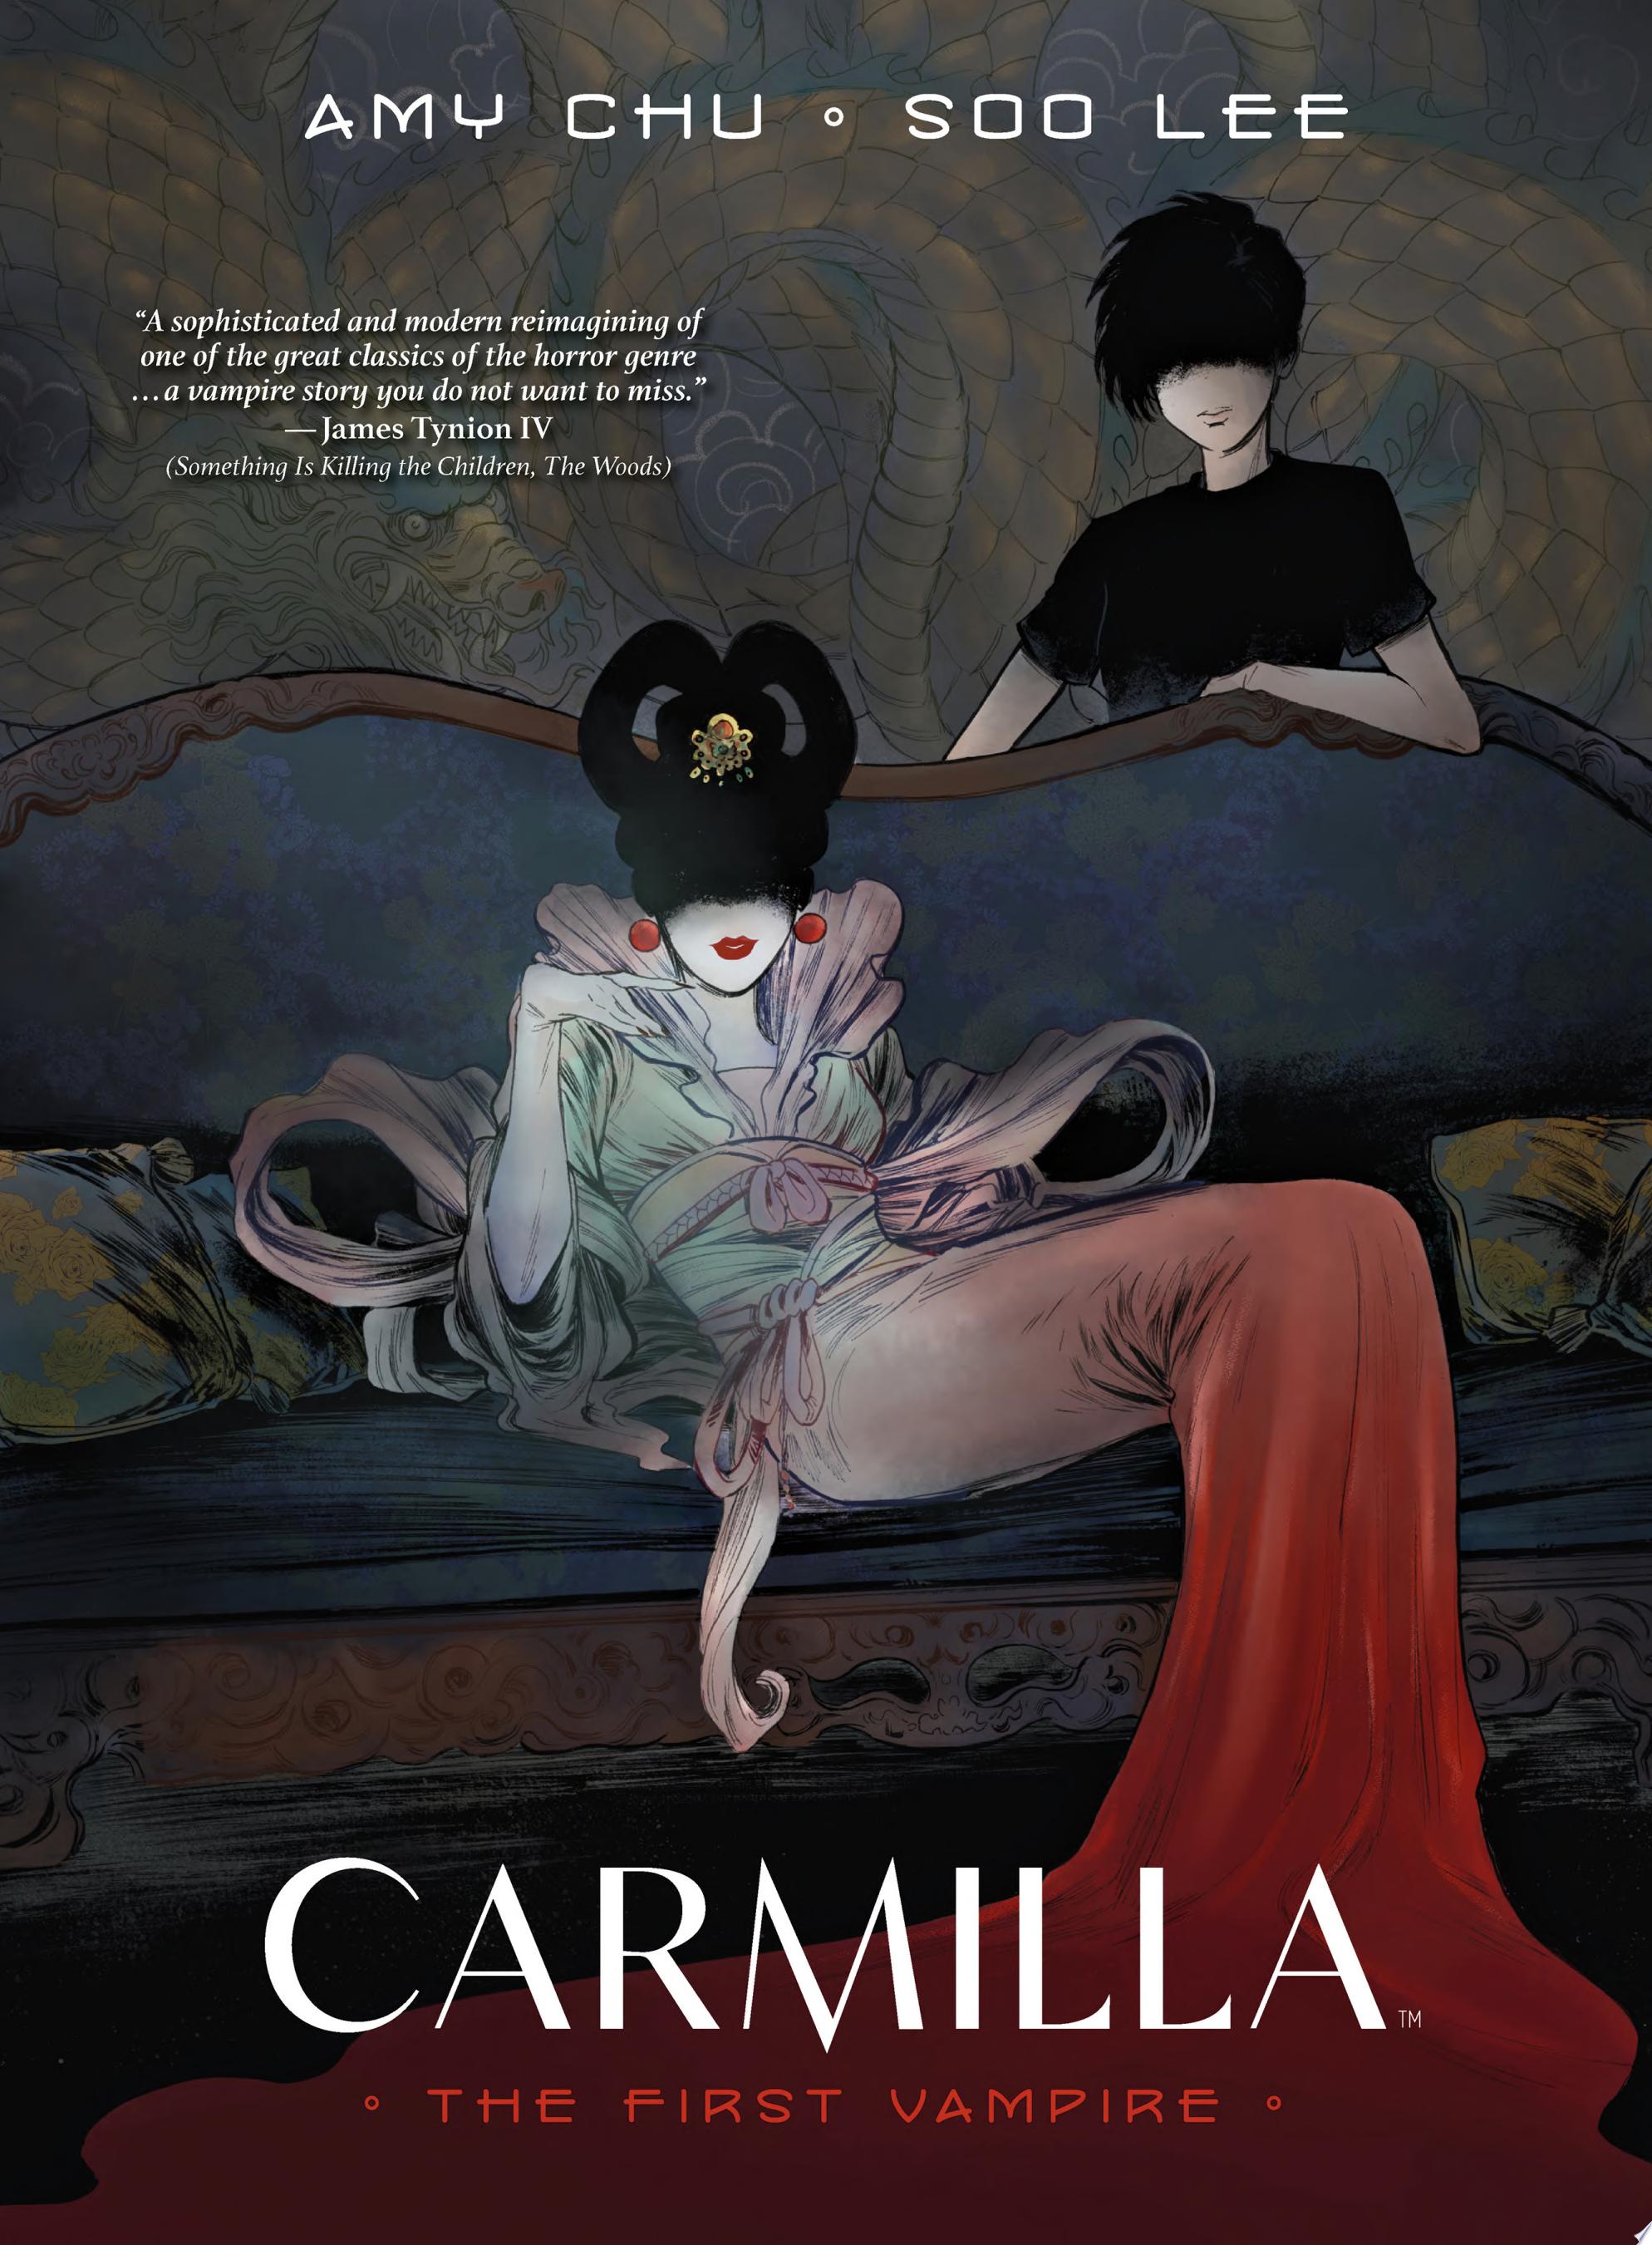 Image for "Carmilla: The First Vampire"